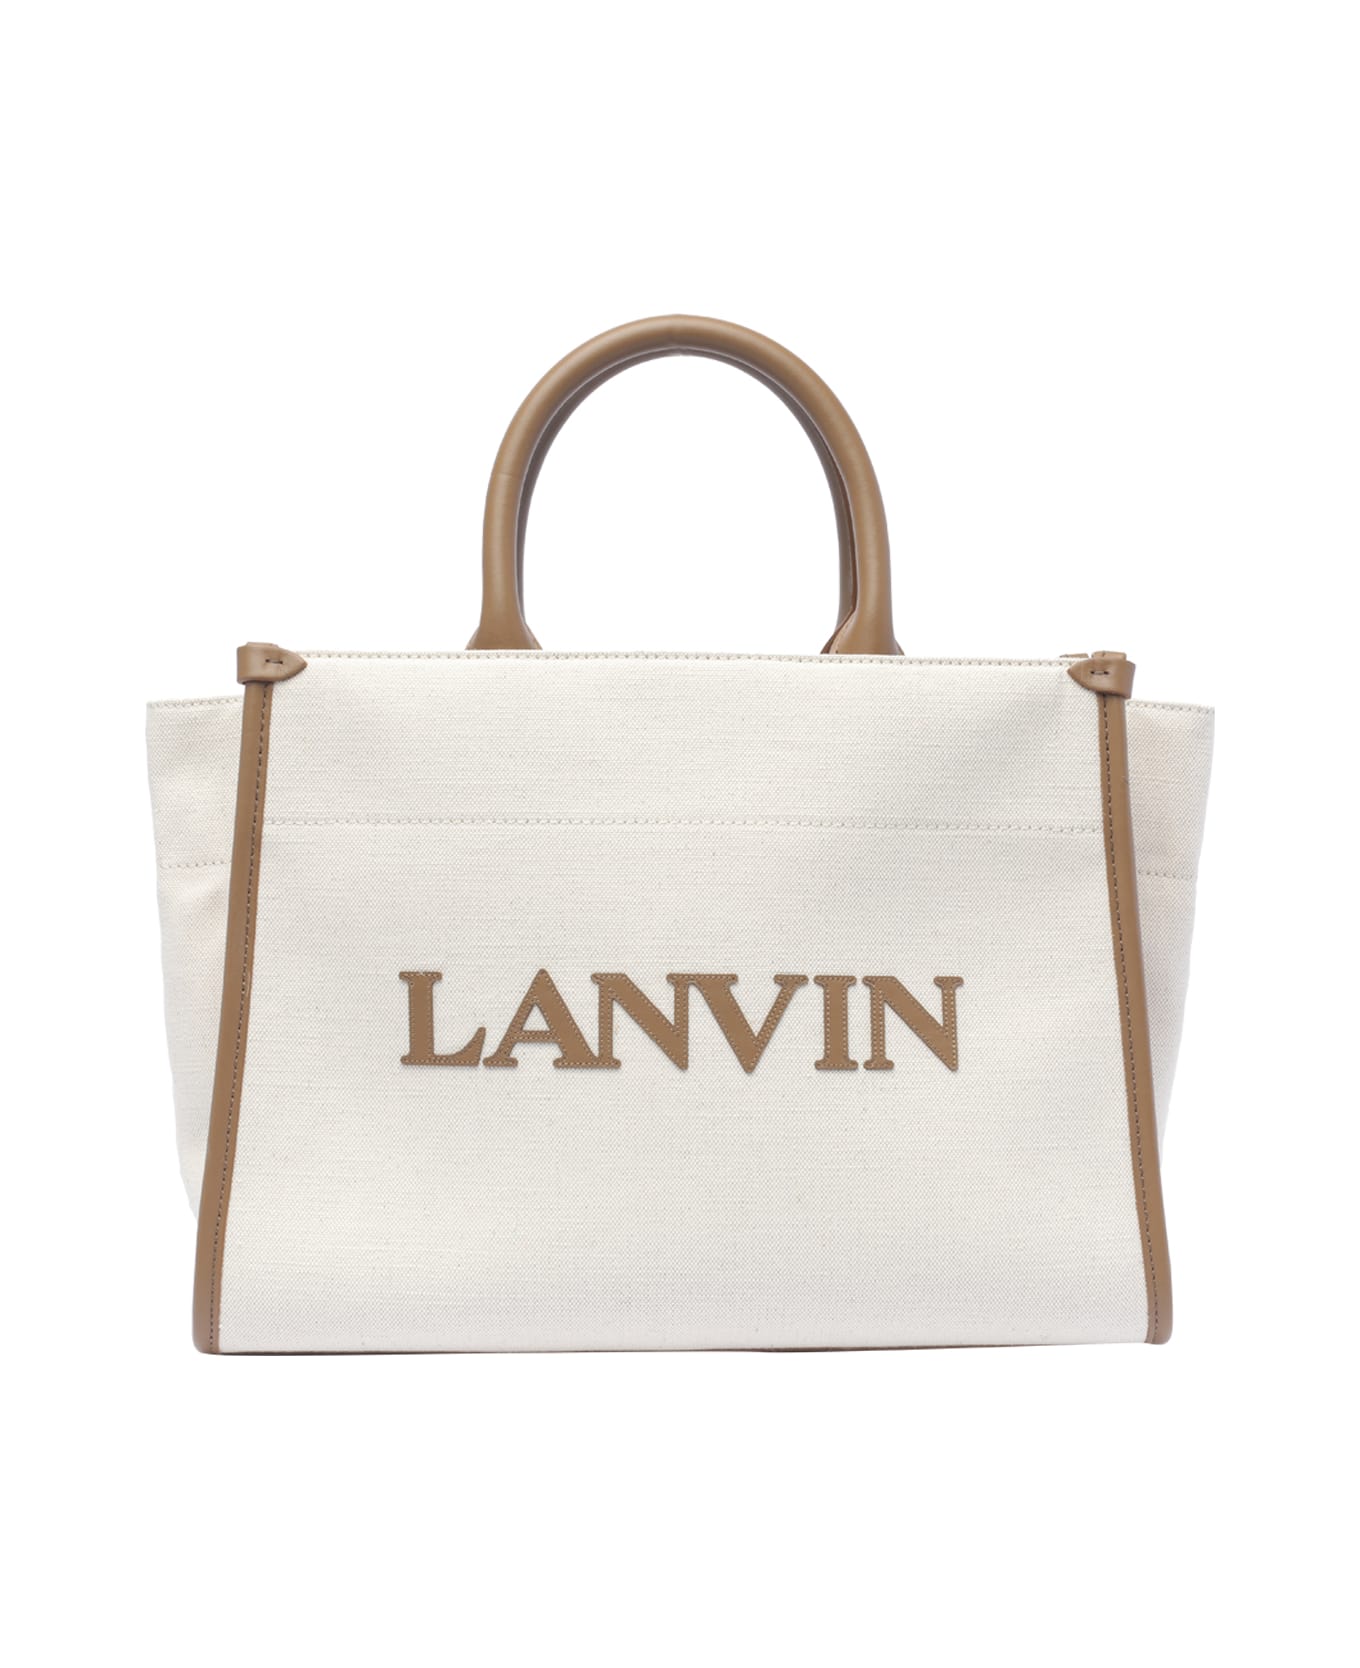 Lanvin In&out Canvas Tote Bag - Beige